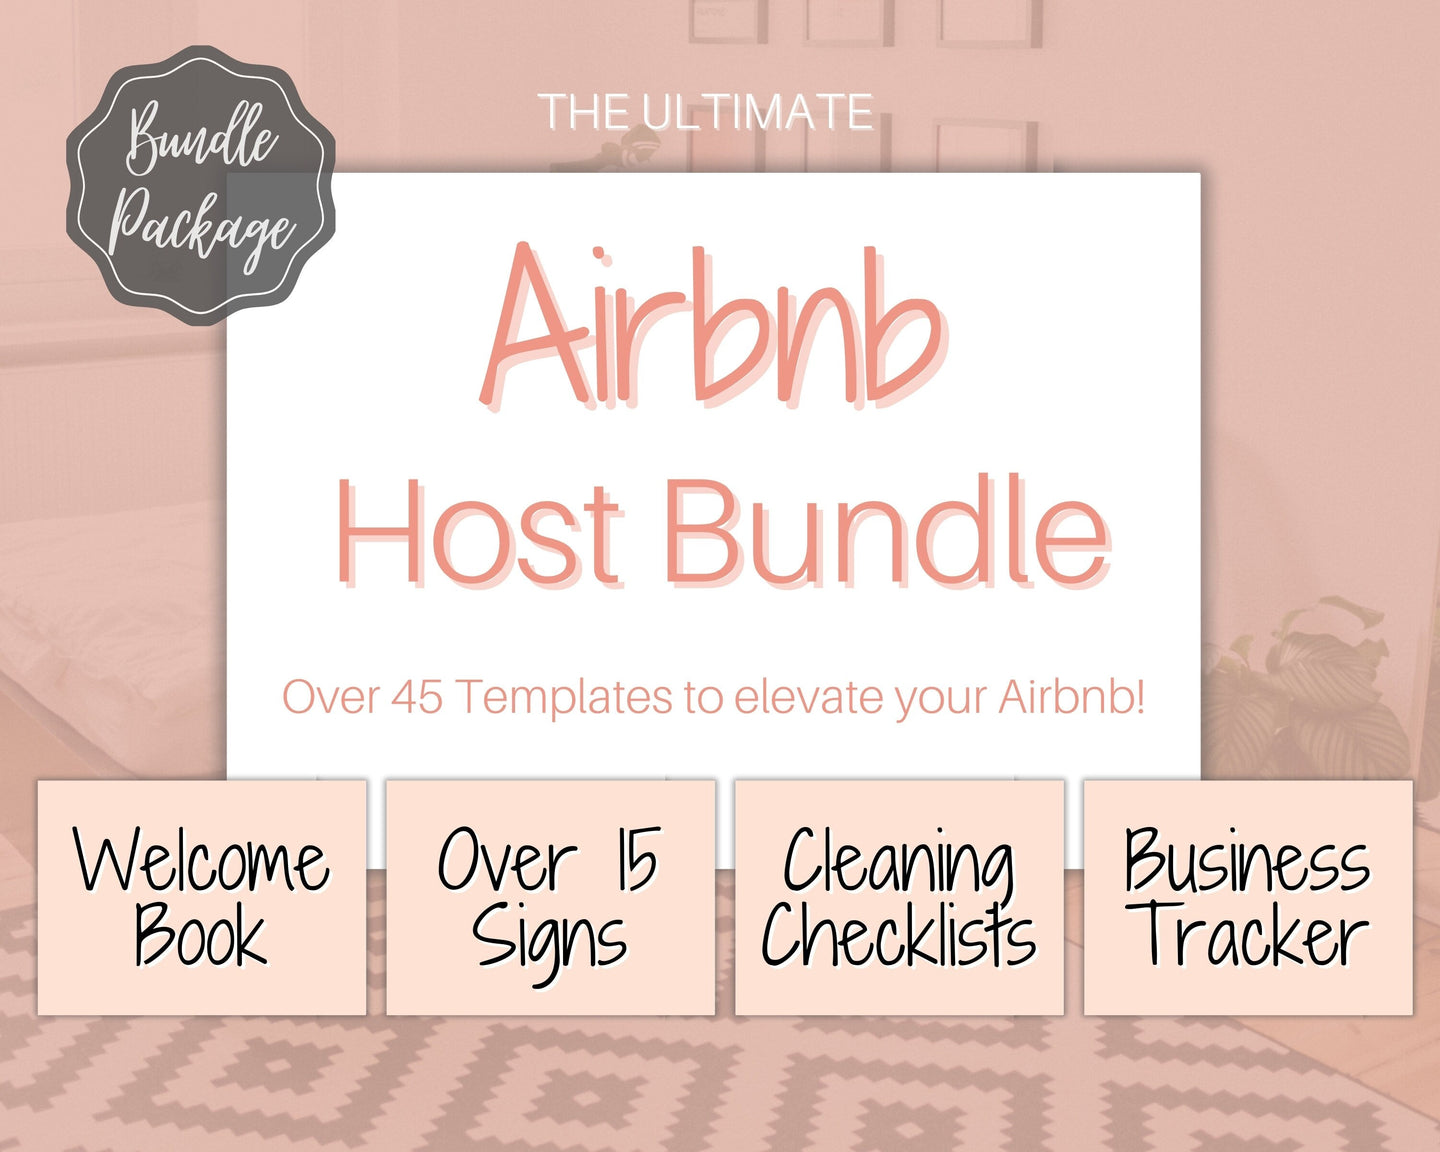 Airbnb Template BUNDLE! Editable Airbnb Signs, Welcome Book, Cleaning checklist, Business Tracker Spreadsheet, Air bnb Printables, Host VRBO | Pink